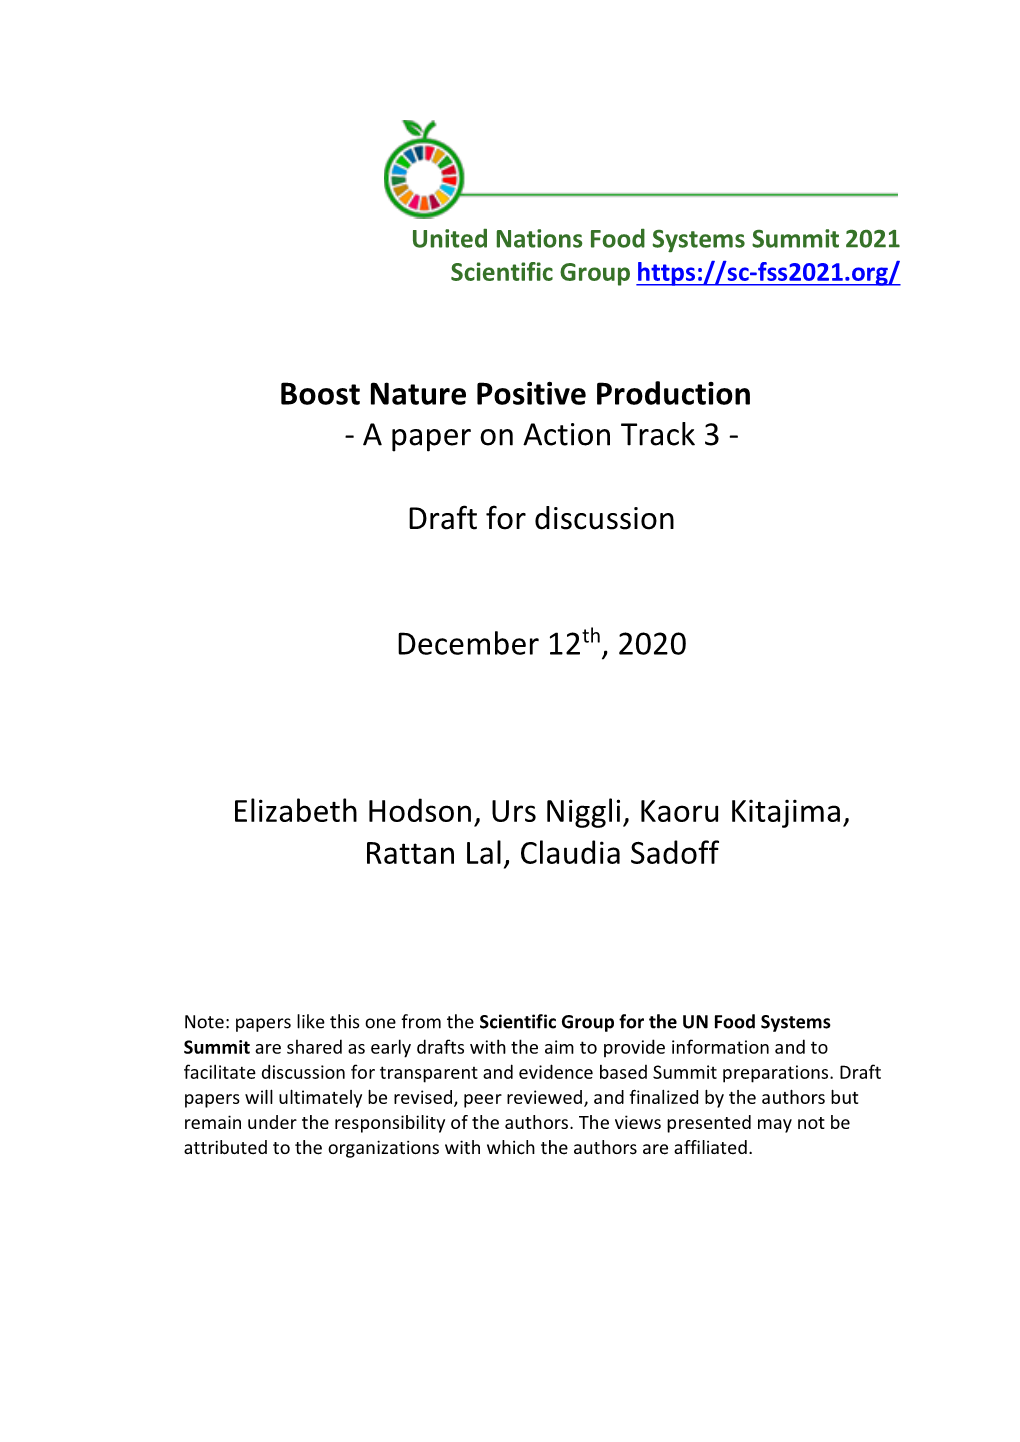 Boost Nature Positive Production - a Paper on Action Track 3